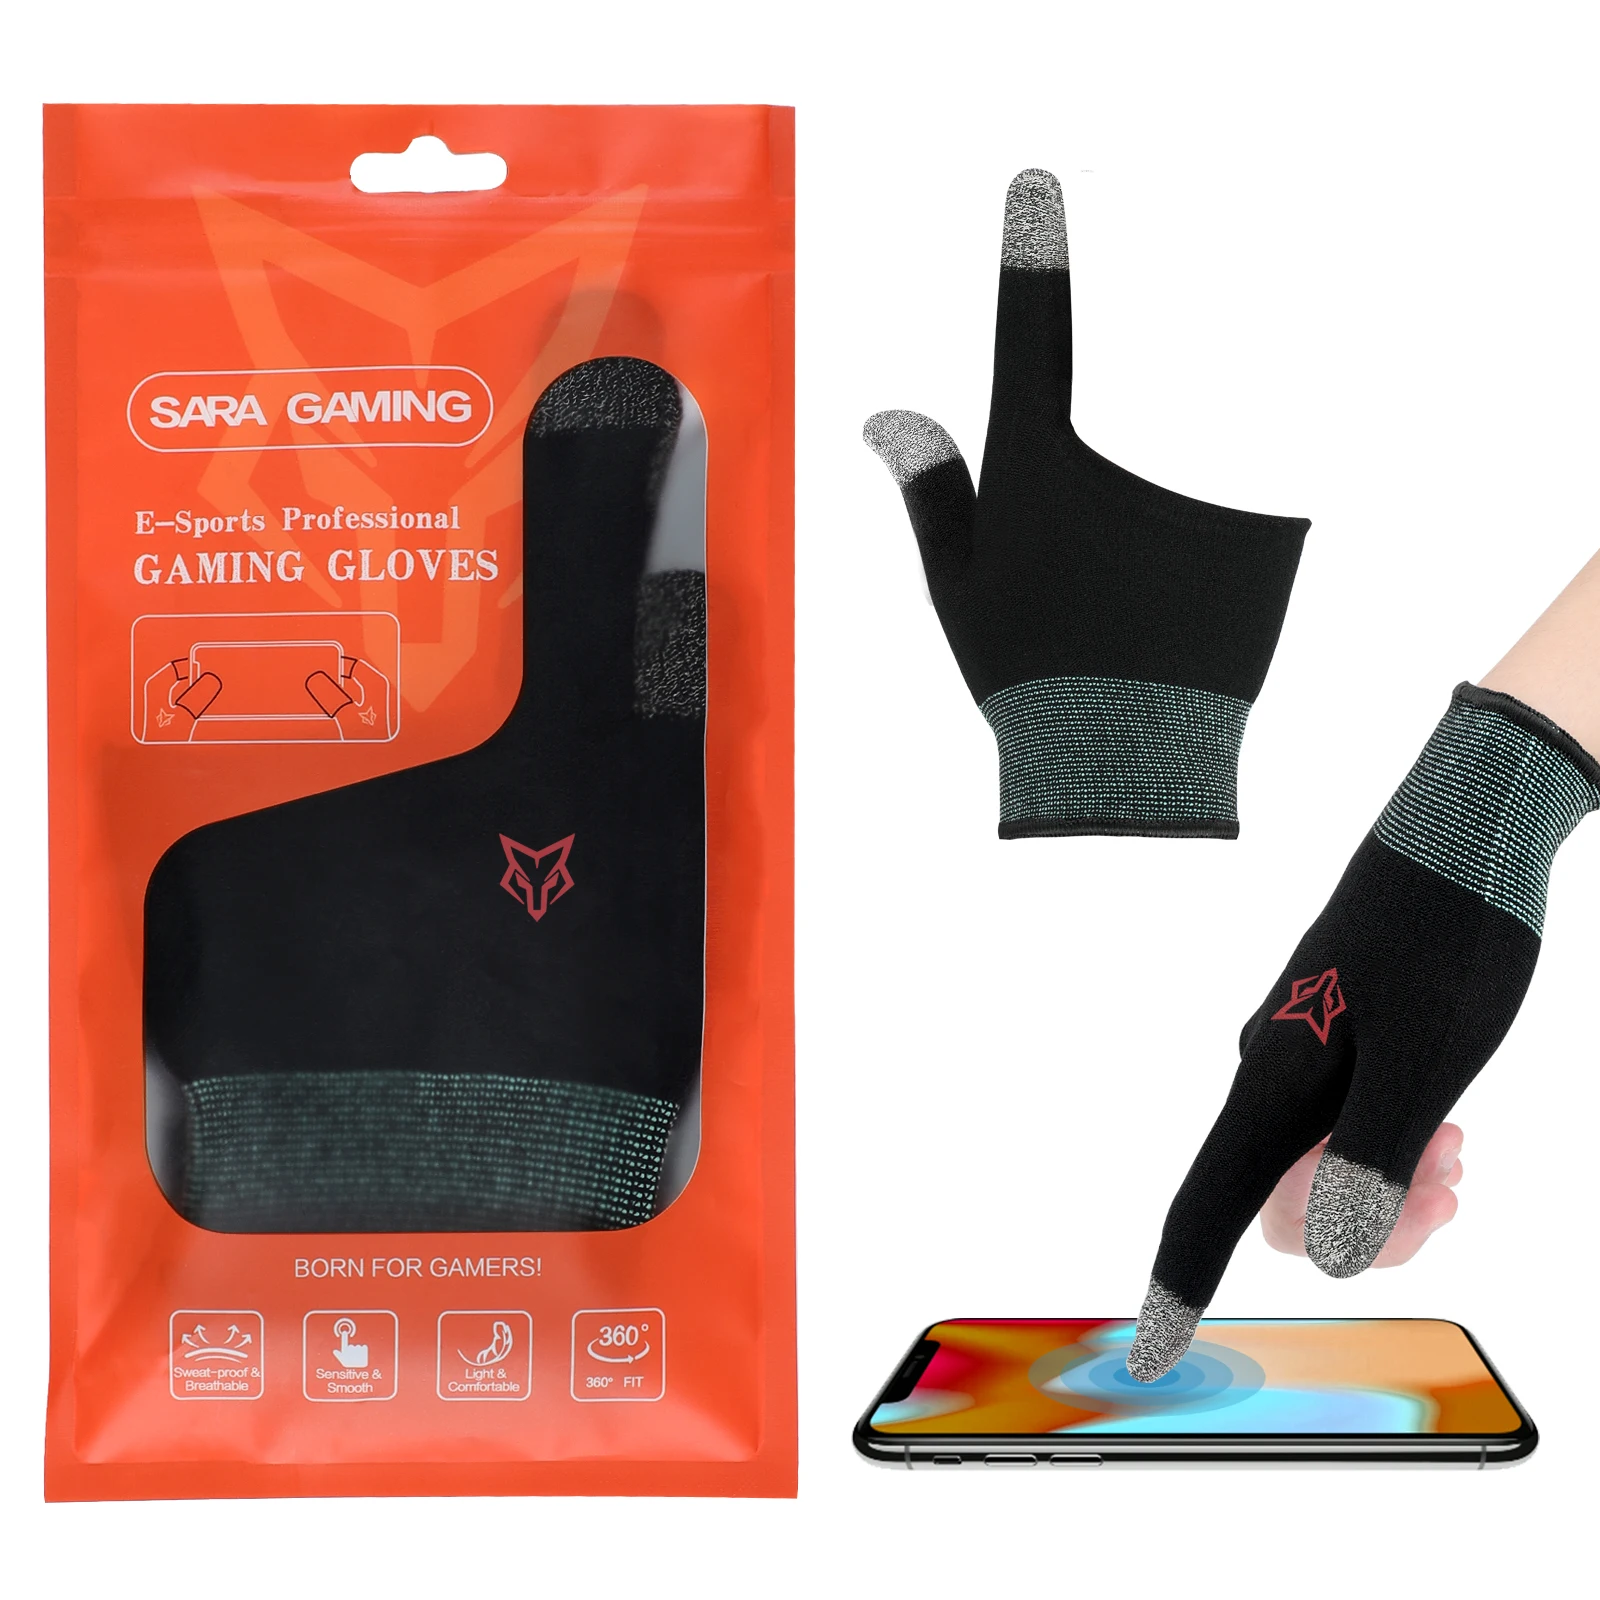 

Sarafox G01 E-sport Anti-Sweat Breathable Touch Finger Highly Sensitive Nano-Silver Fiber Material For All Mobile Gaming